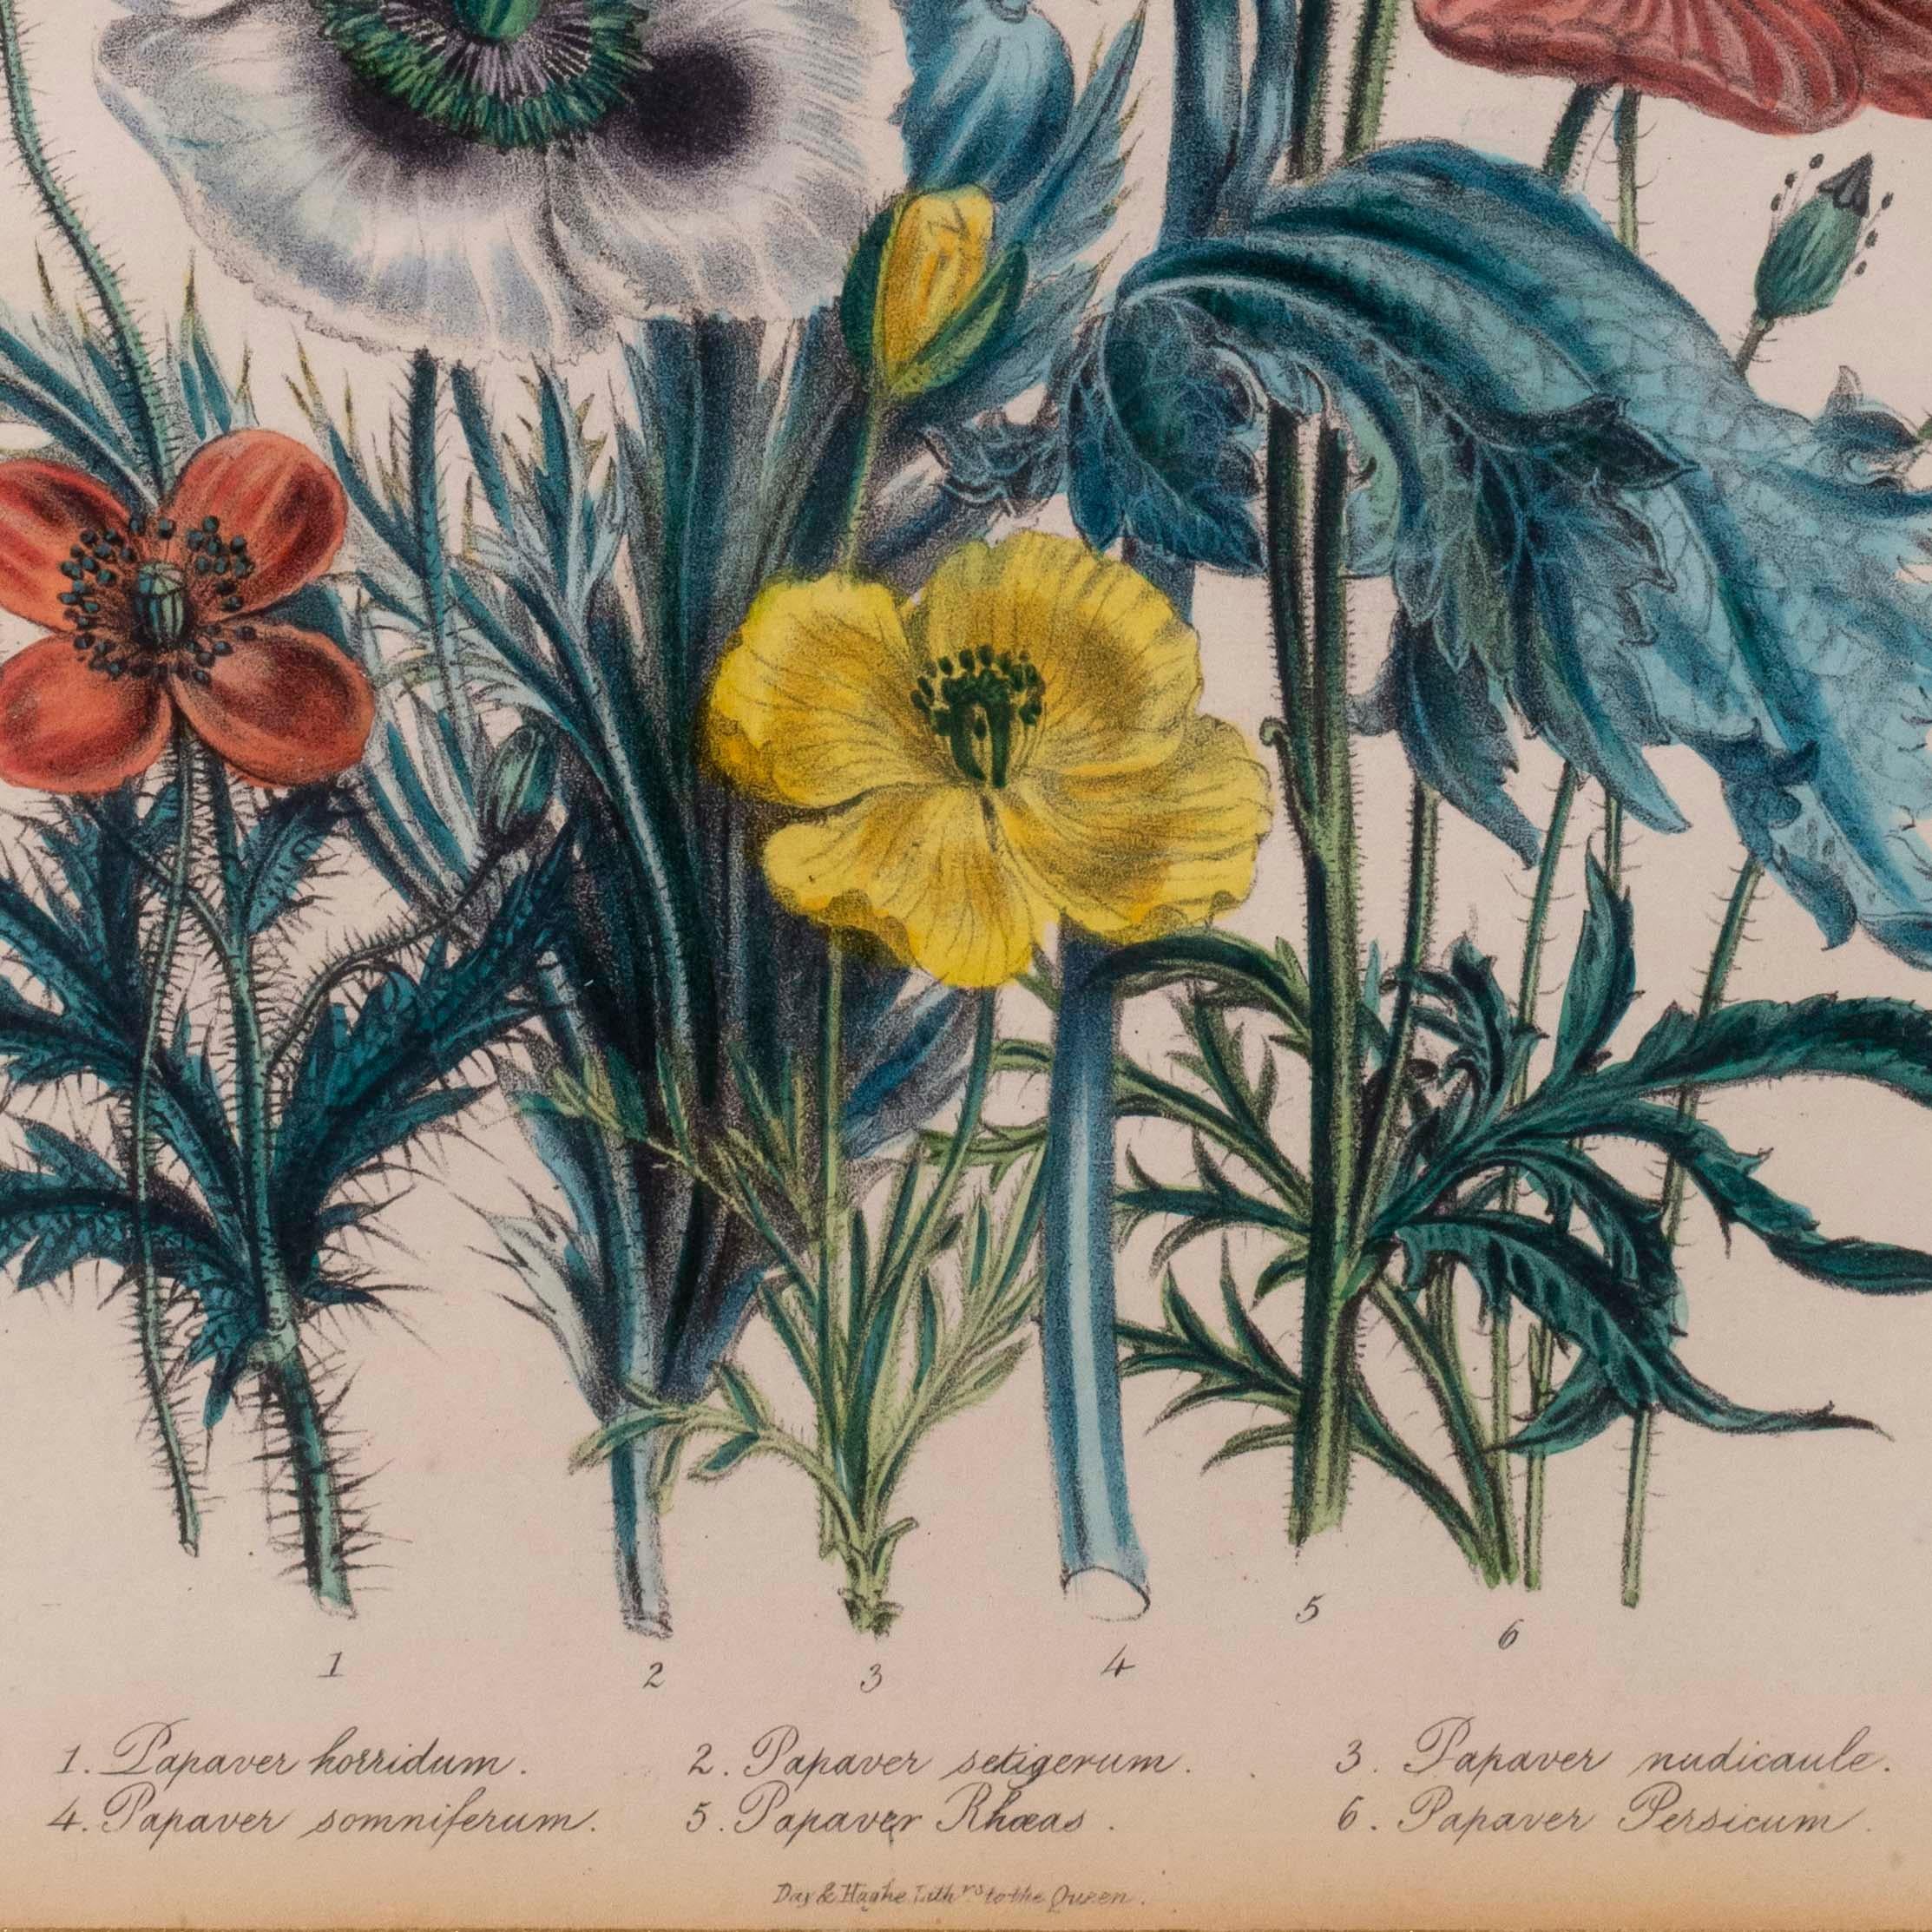 An exquisite engraving with vibrant original hand-colouring, from the rare first edition of British Wild Flowers, London: William Smith, 1849. 

Why we like them
Exquisitely hand-coloured, vibrant and succulent, these beautiful prints will fit